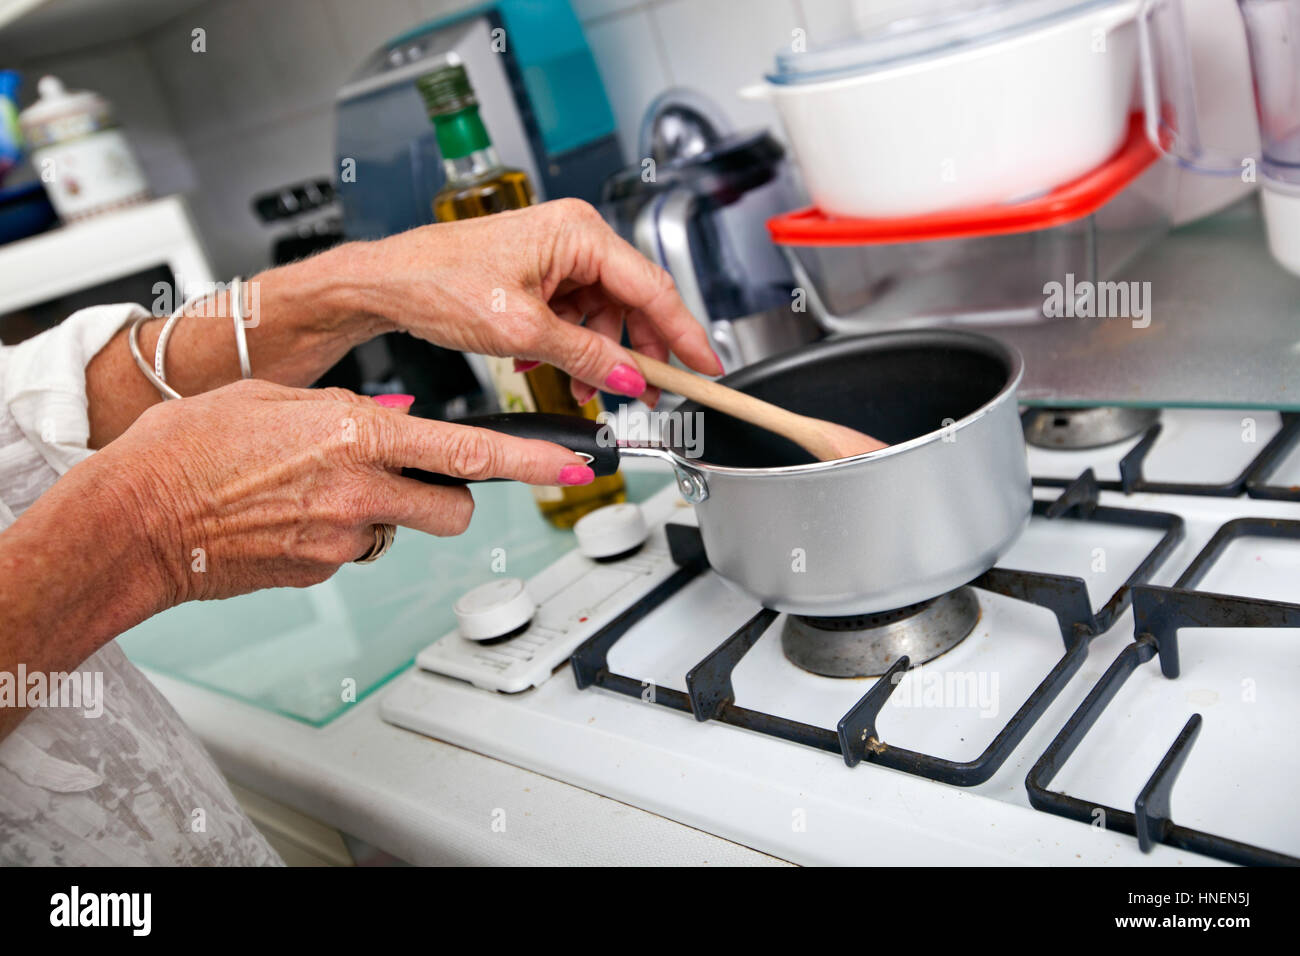 Cropped image of senior woman cooking at kitchen counter Stock Photo